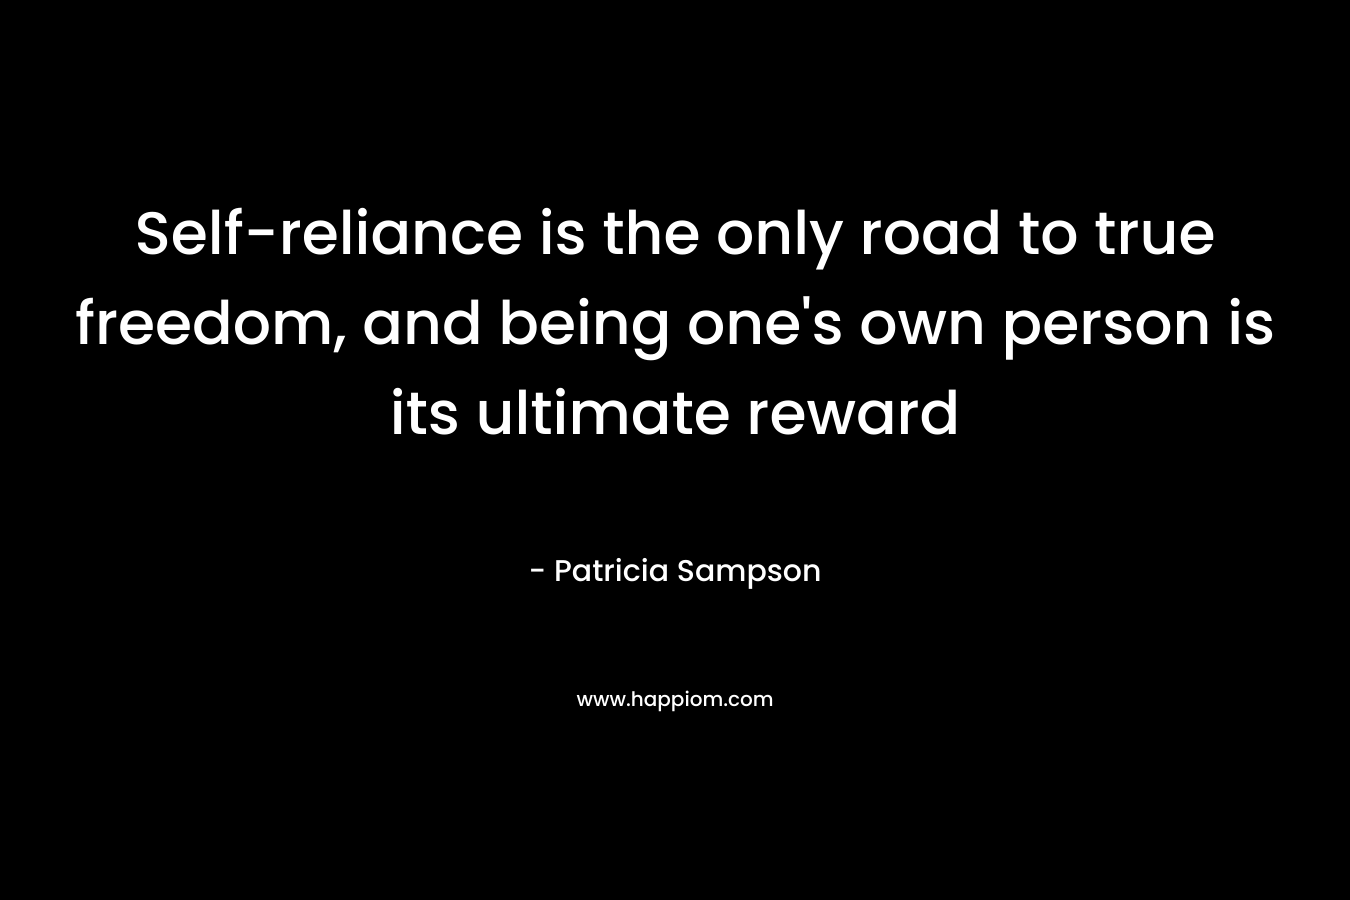 Self-reliance is the only road to true freedom, and being one's own person is its ultimate reward